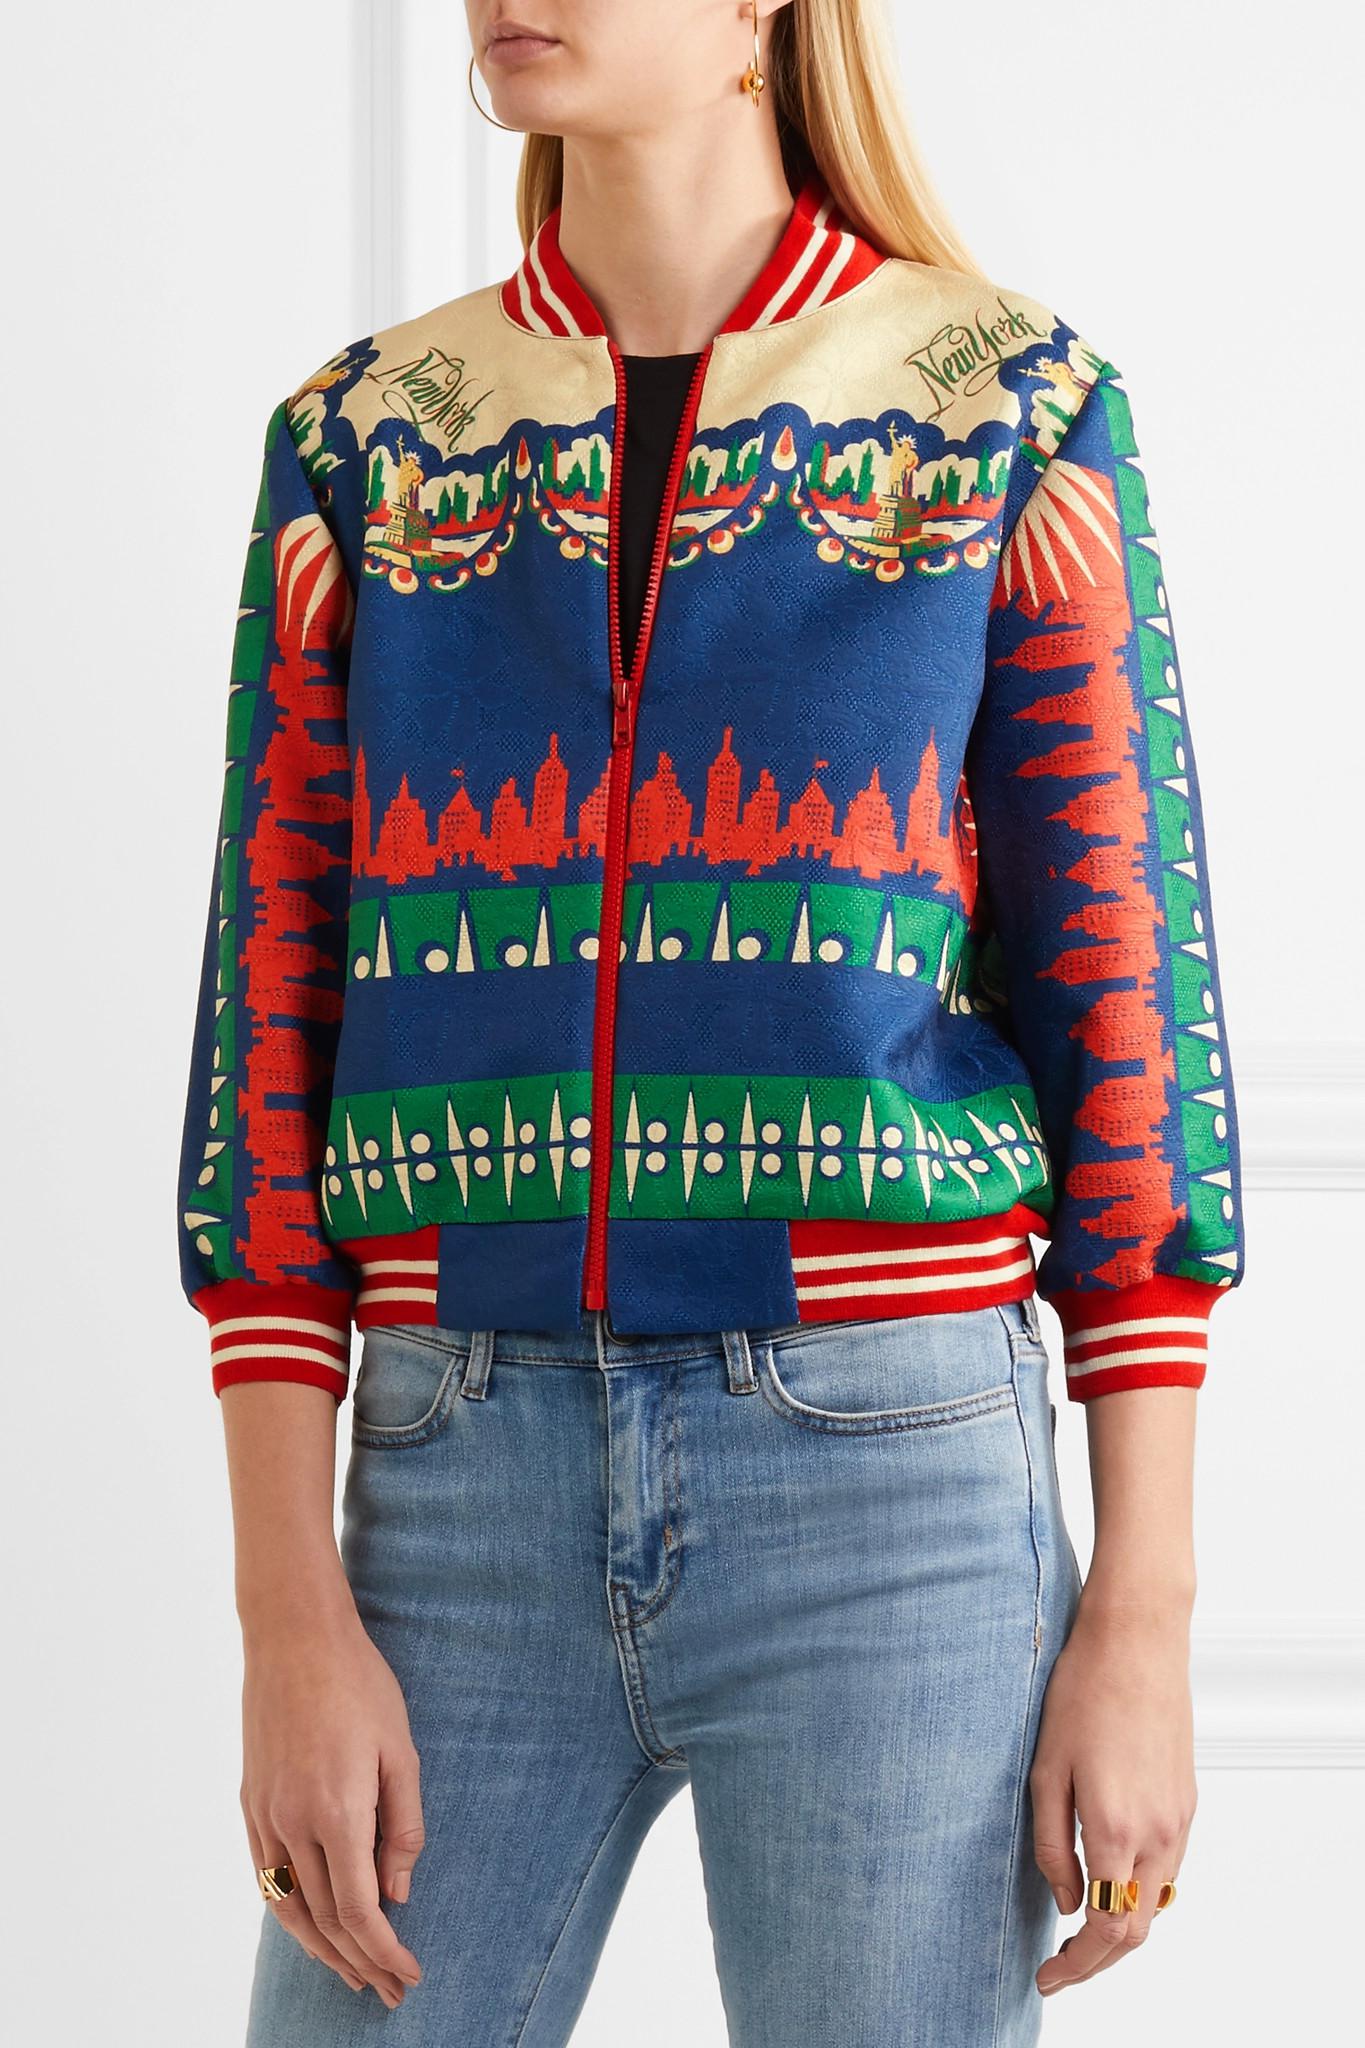 Anna Sui New York Jacquard Bomber Jacket in Blue